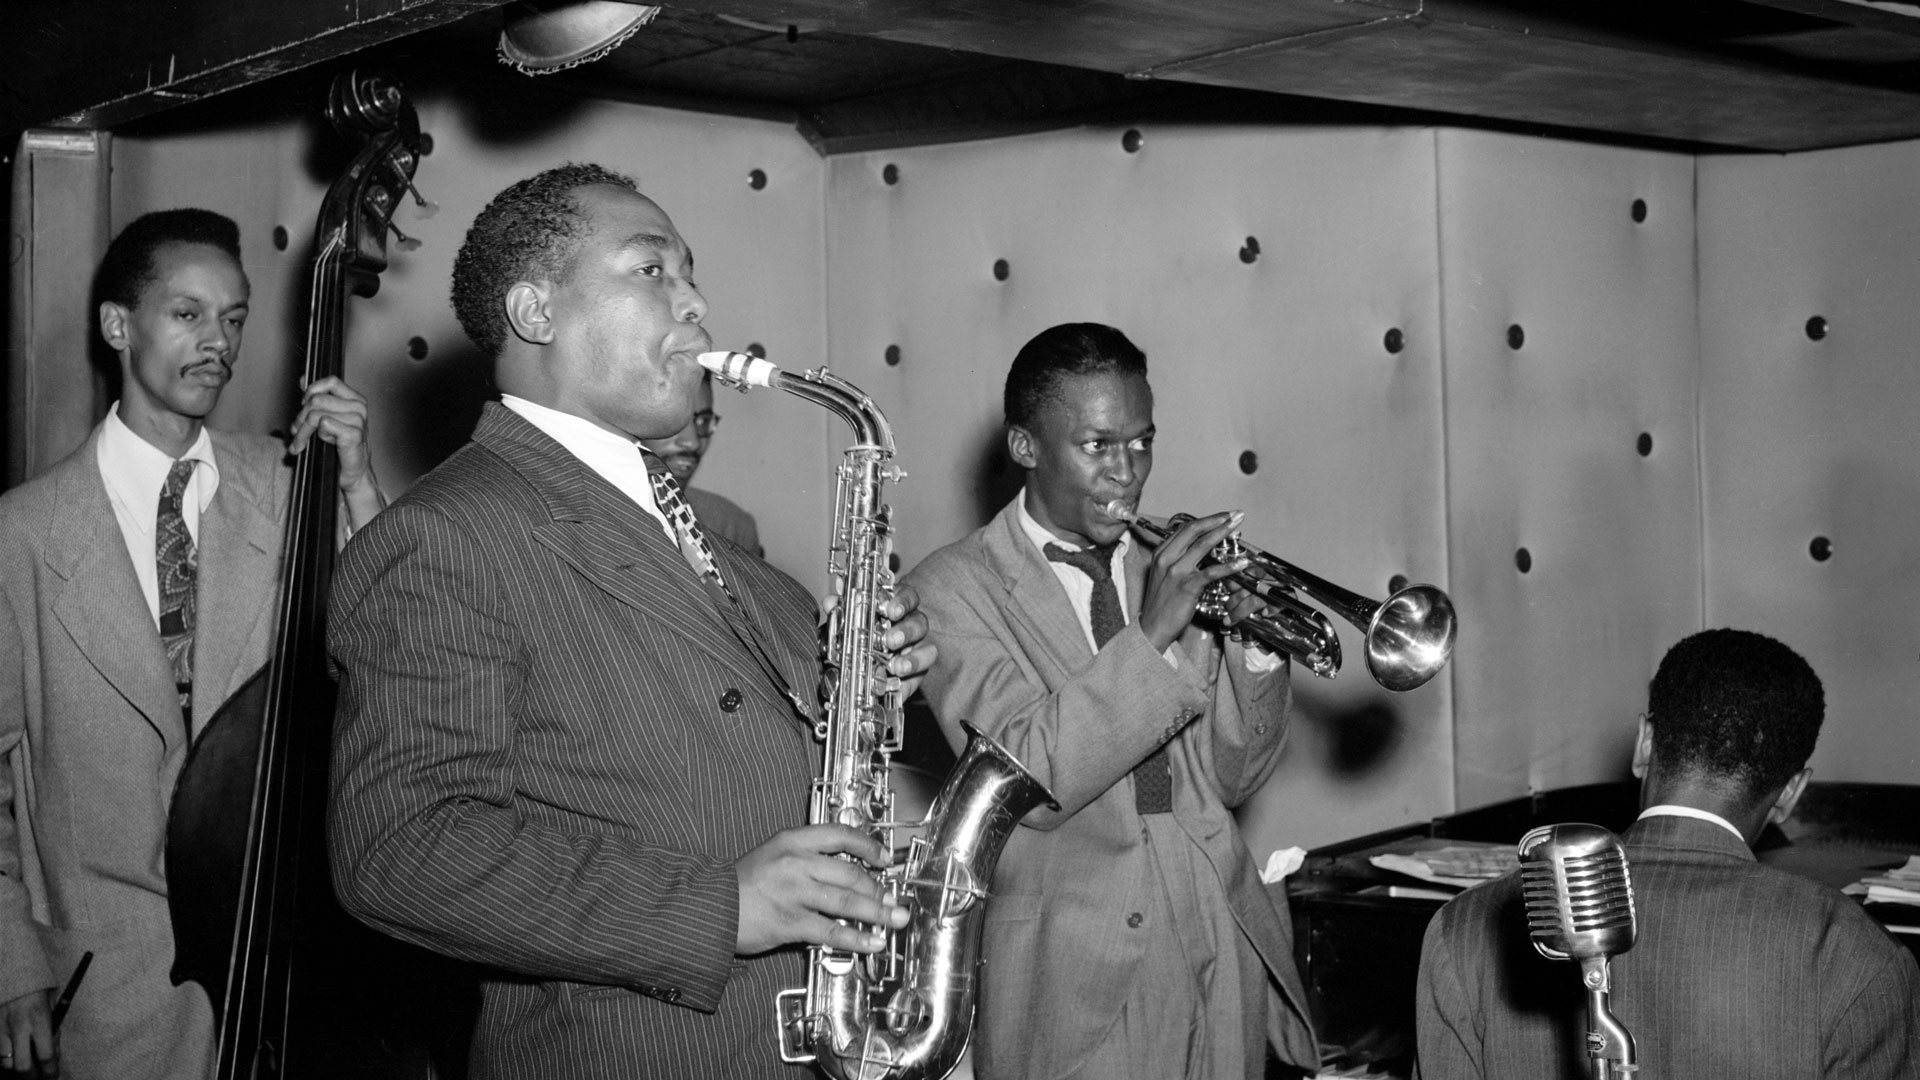 A History of the Saxophone in Jazz